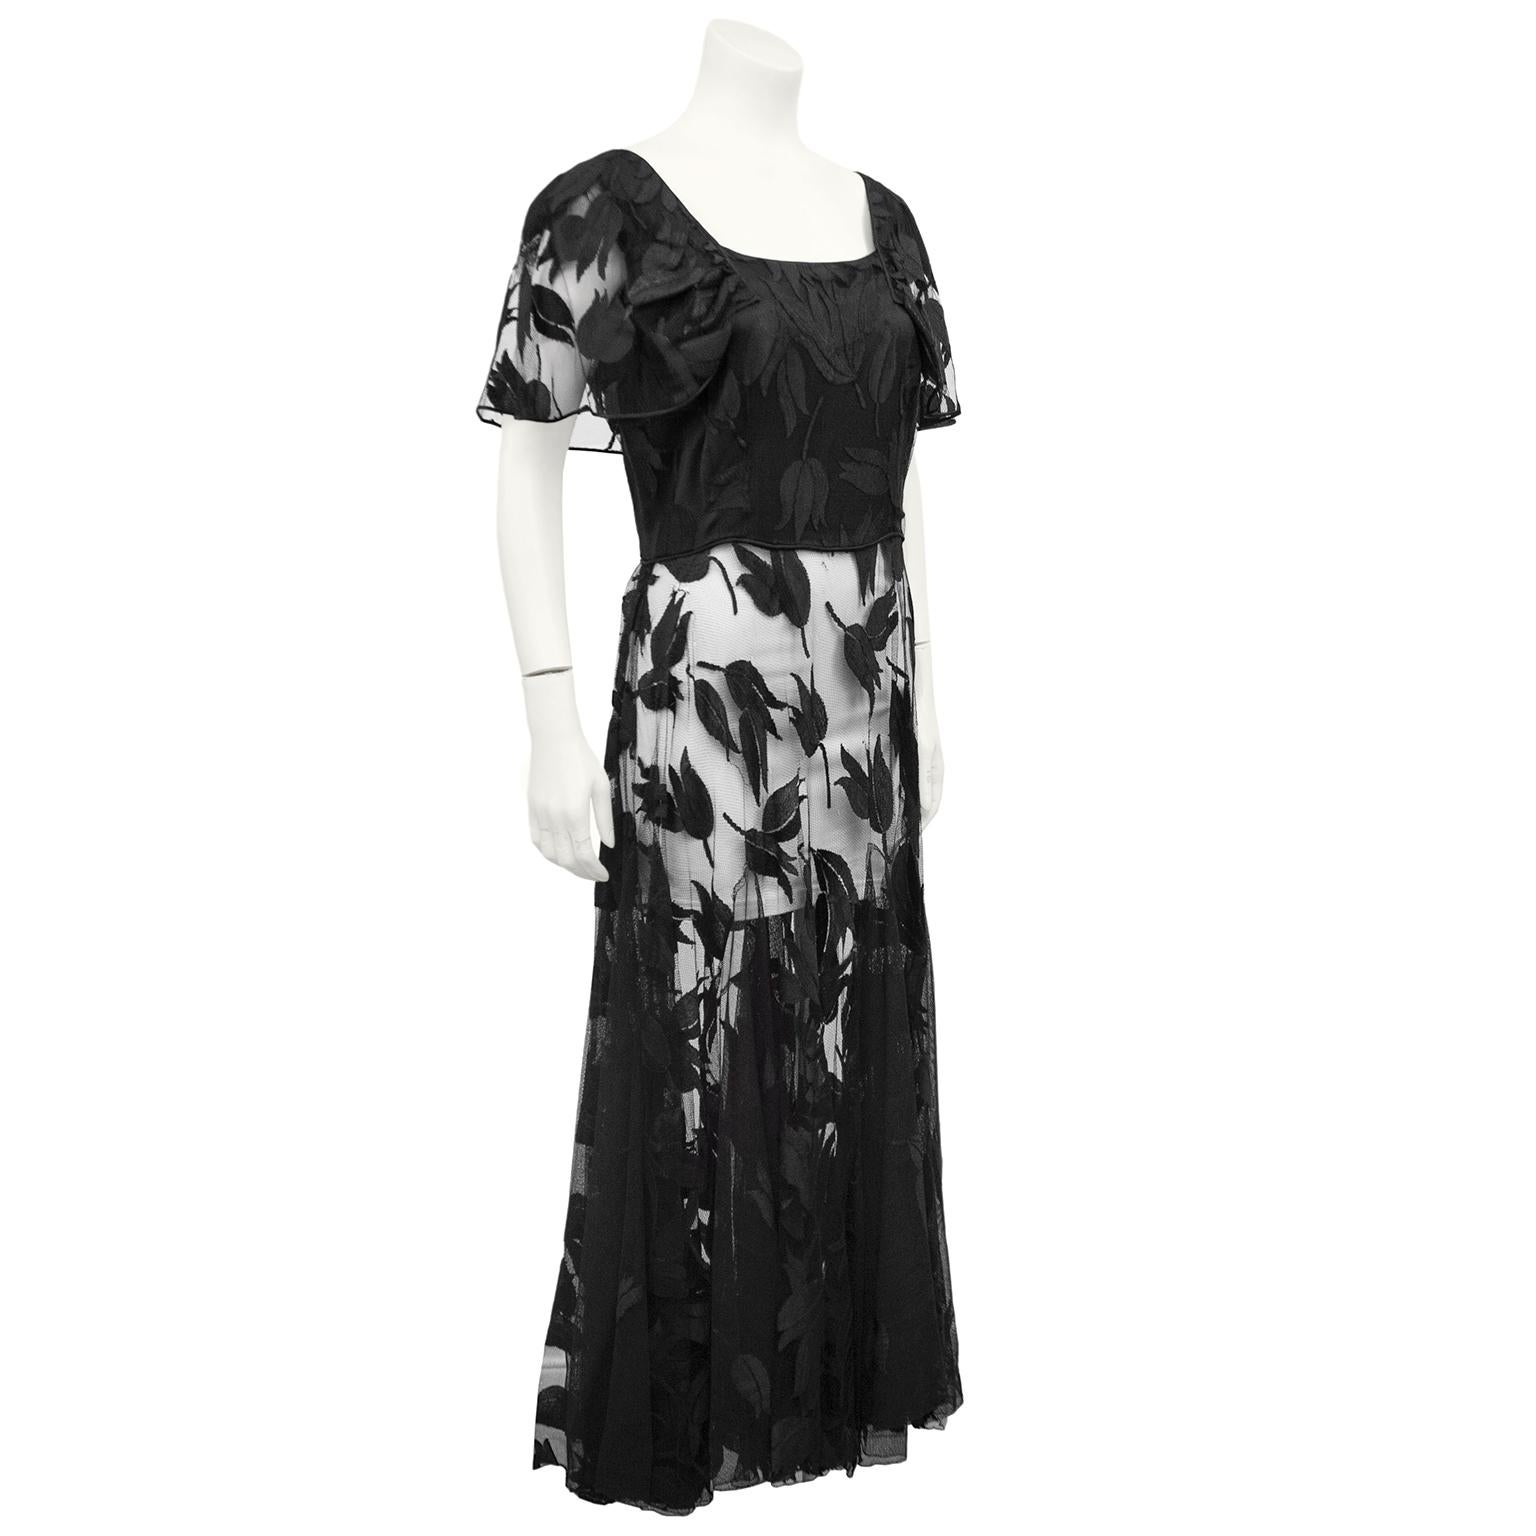 1940's black net and floral motif gown with short sleeves in excellent condition. Slim fit through the waist sits close to the body. Lined with black on the bodice. Would look so modern with black leggings for an at-home hostess look. Seems as if